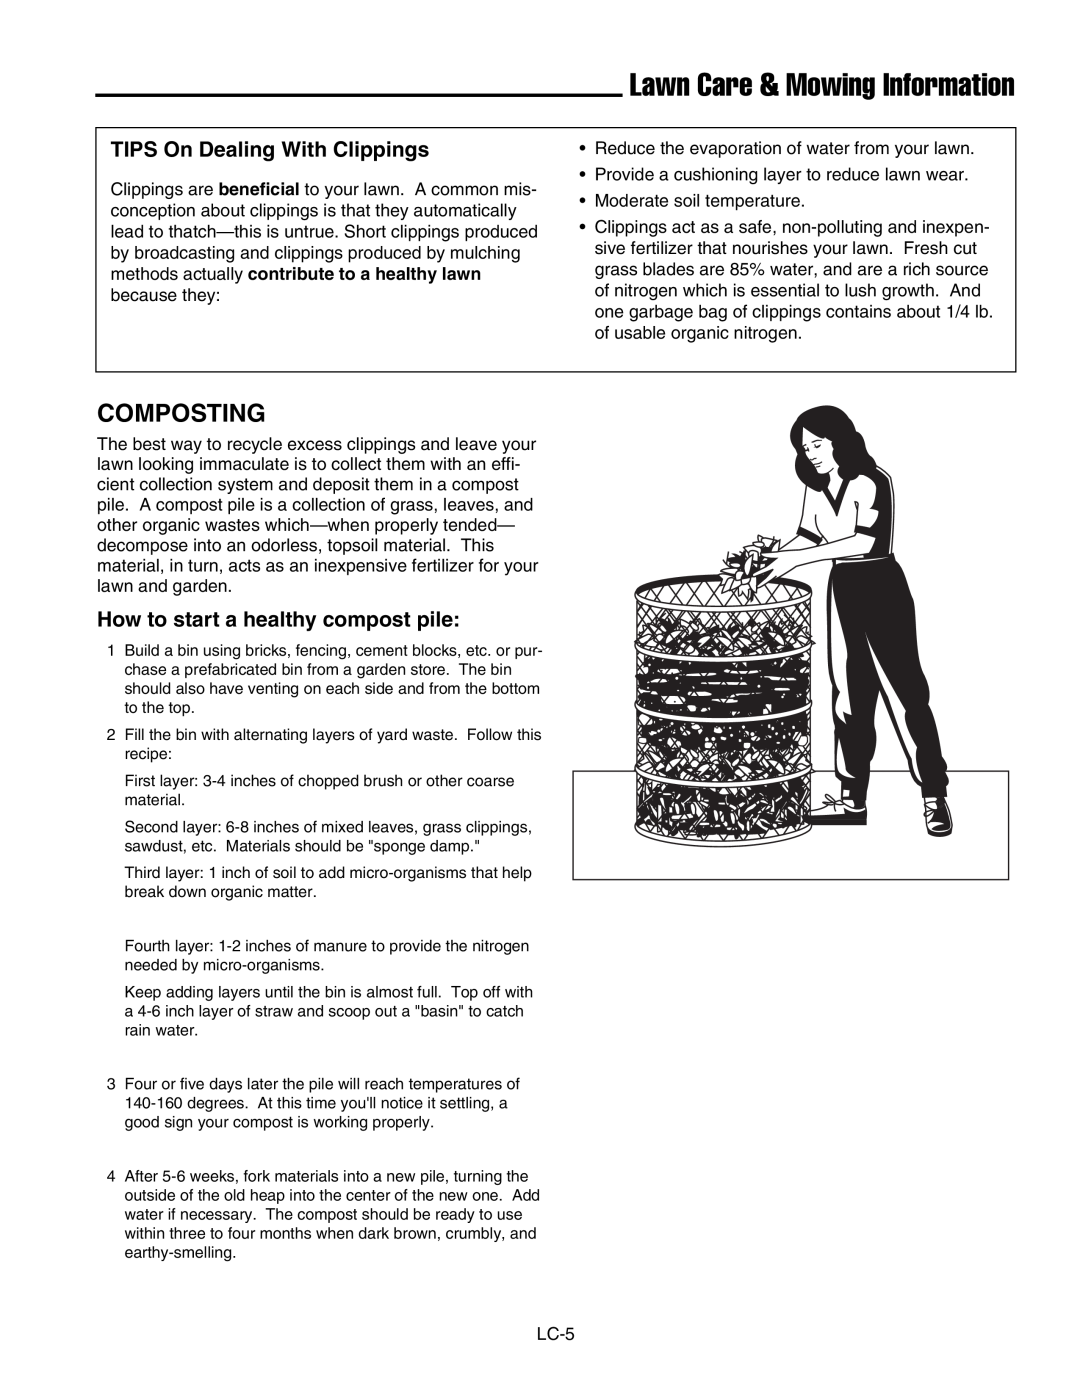 Snapper SFH13320KW important safety instructions Lawn Care & Mowing Information, Composting, TIPS On Dealing With Clippings 